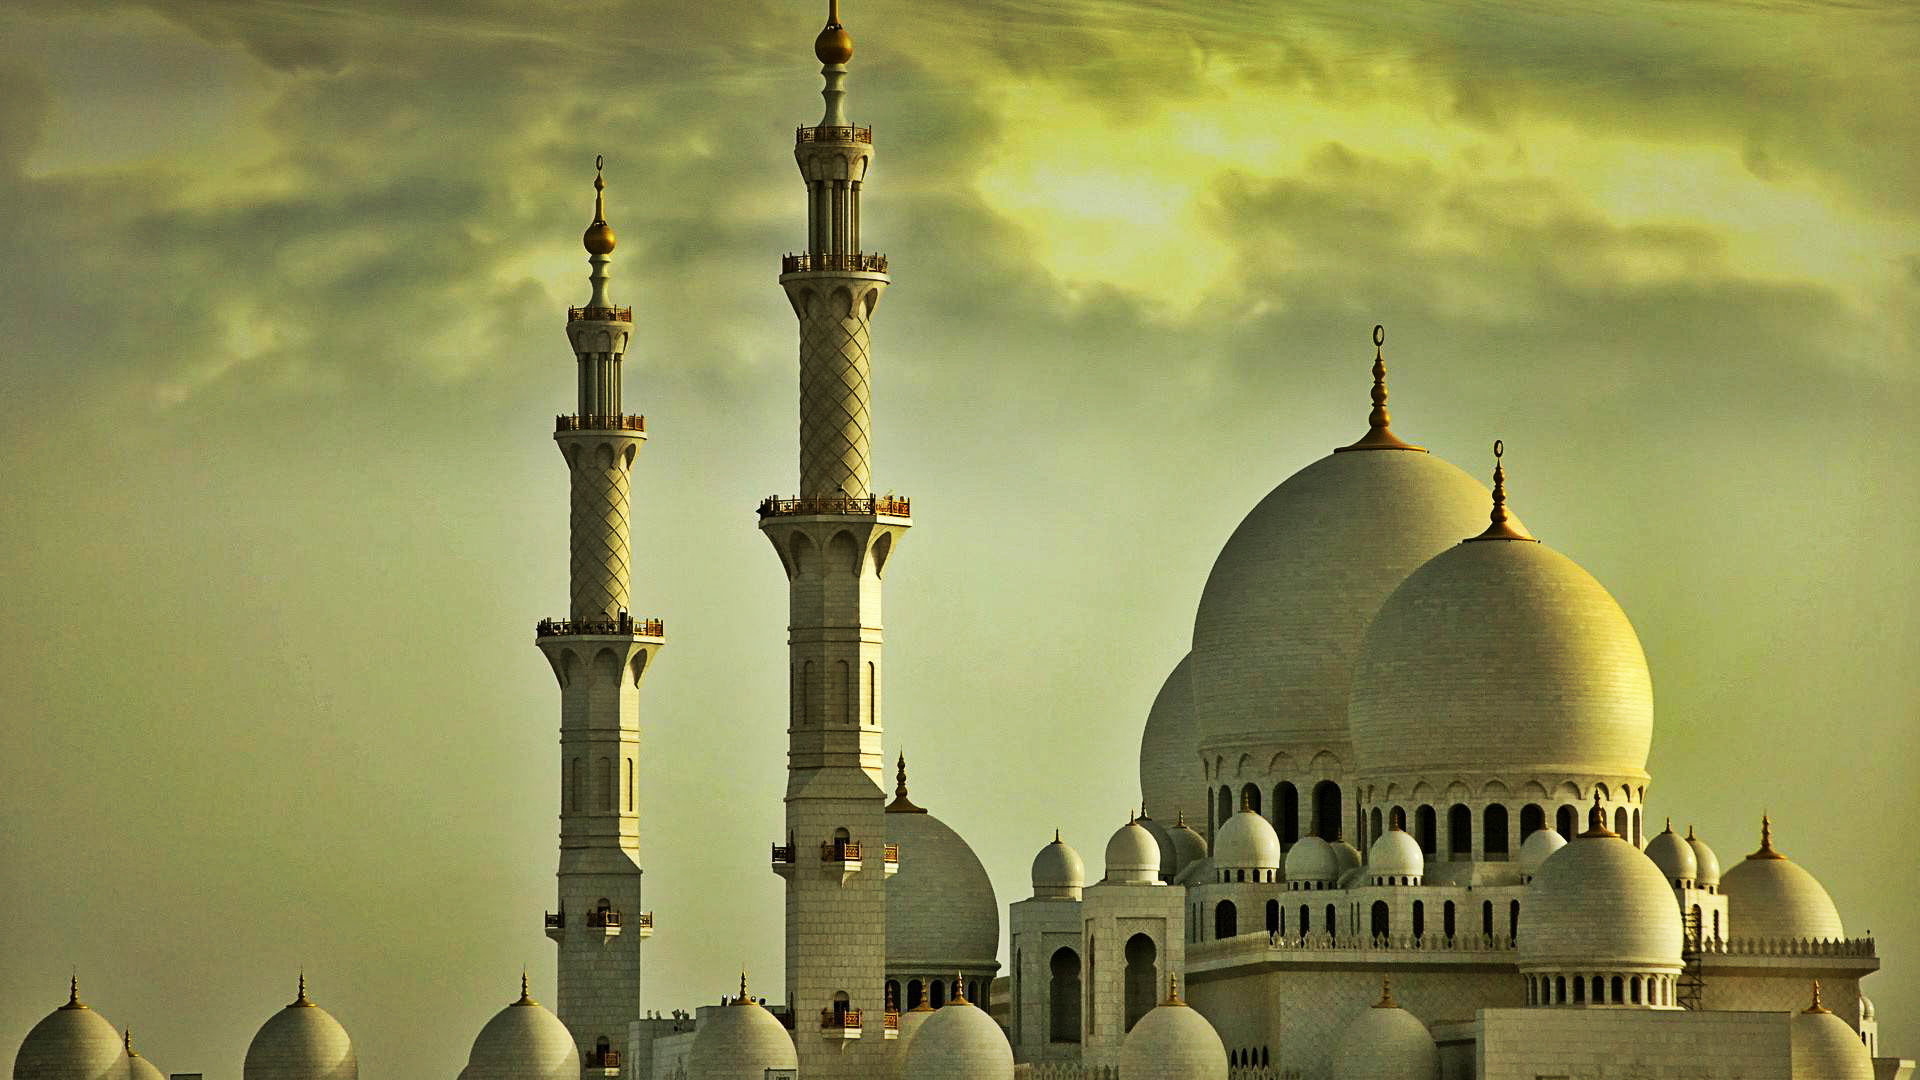 Masjid Macbook Backgrounds with high-resolution 1920x1080 pixel. You can use and set as wallpaper for Notebook Screensavers, Mac Wallpapers, Mobile Home Screen, iPhone or Android Phones Lock Screen